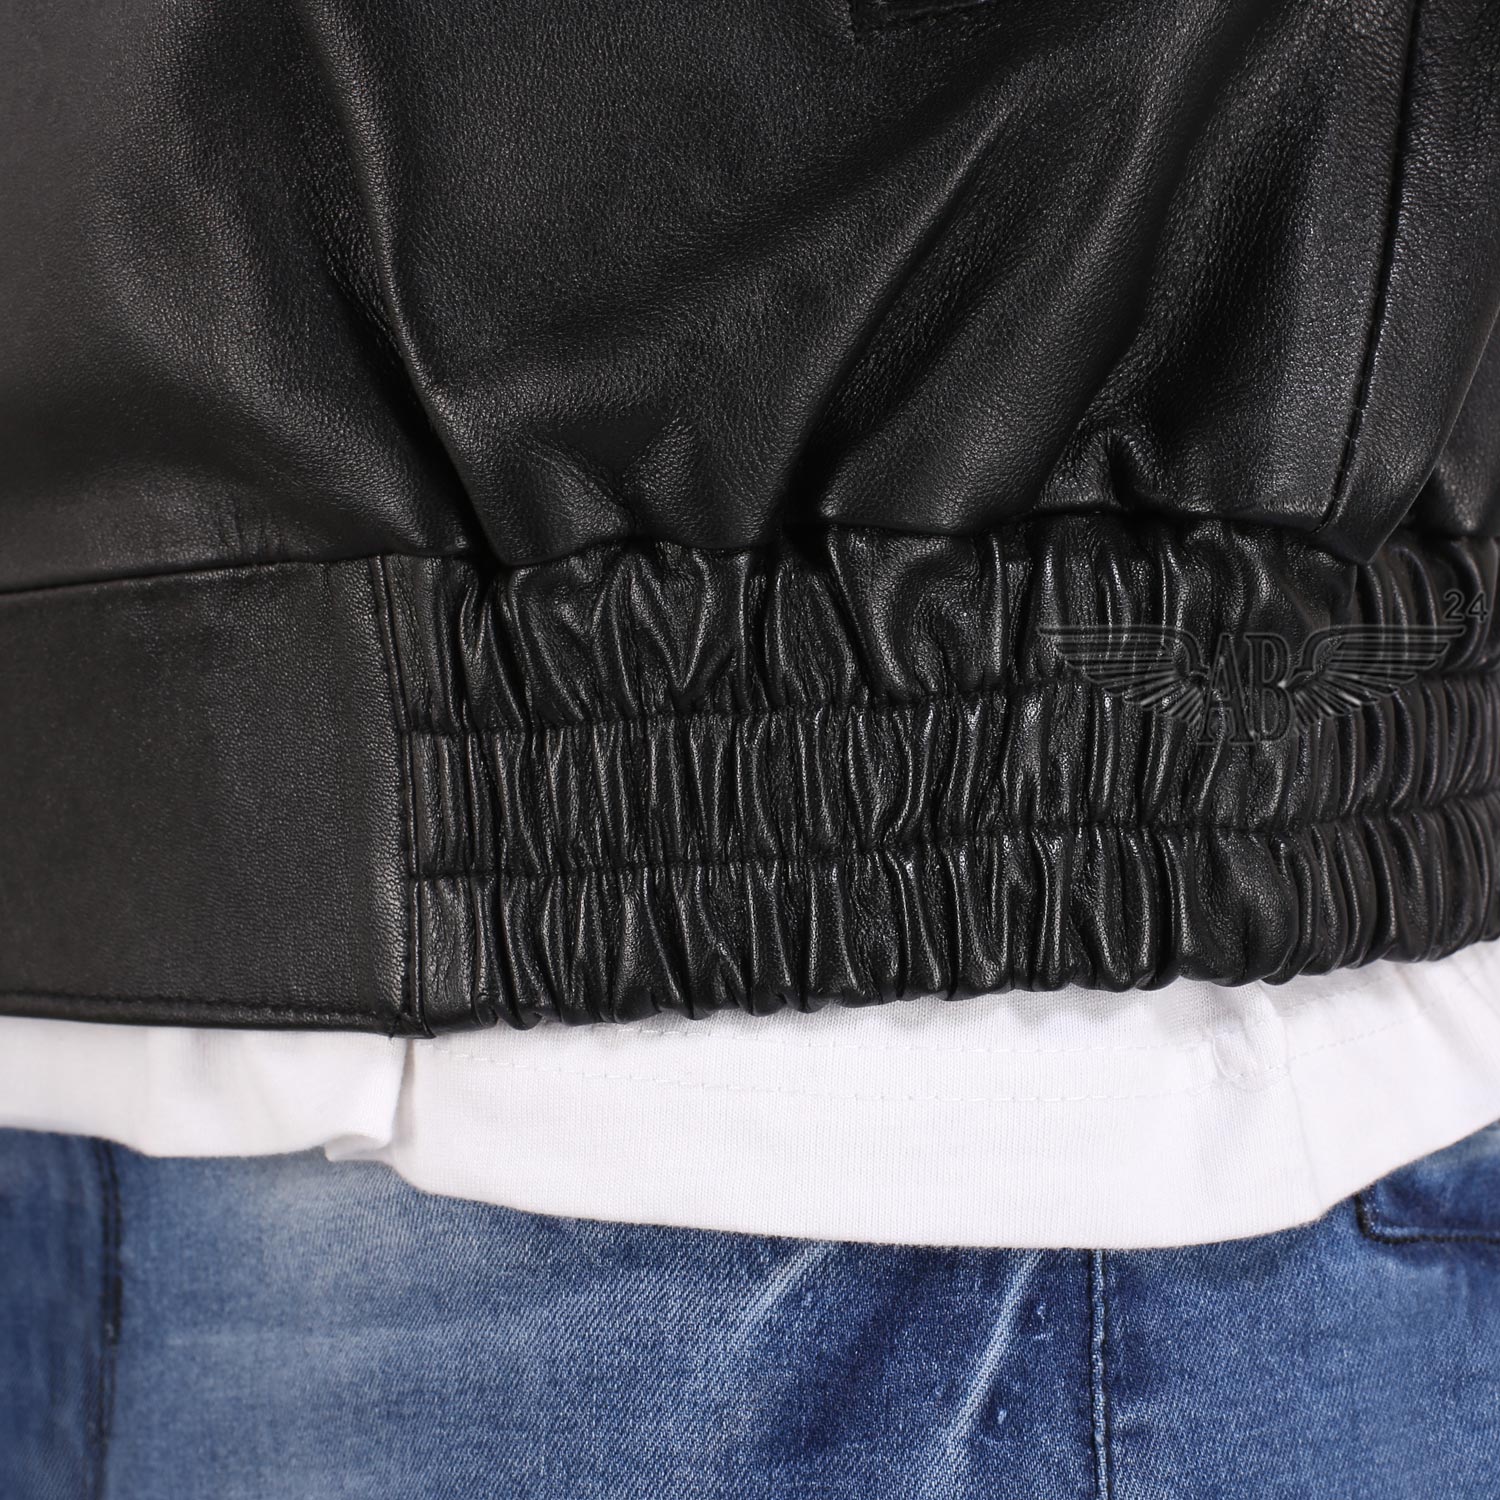 Close view of Waist of Bomber jacket. nice fitting.